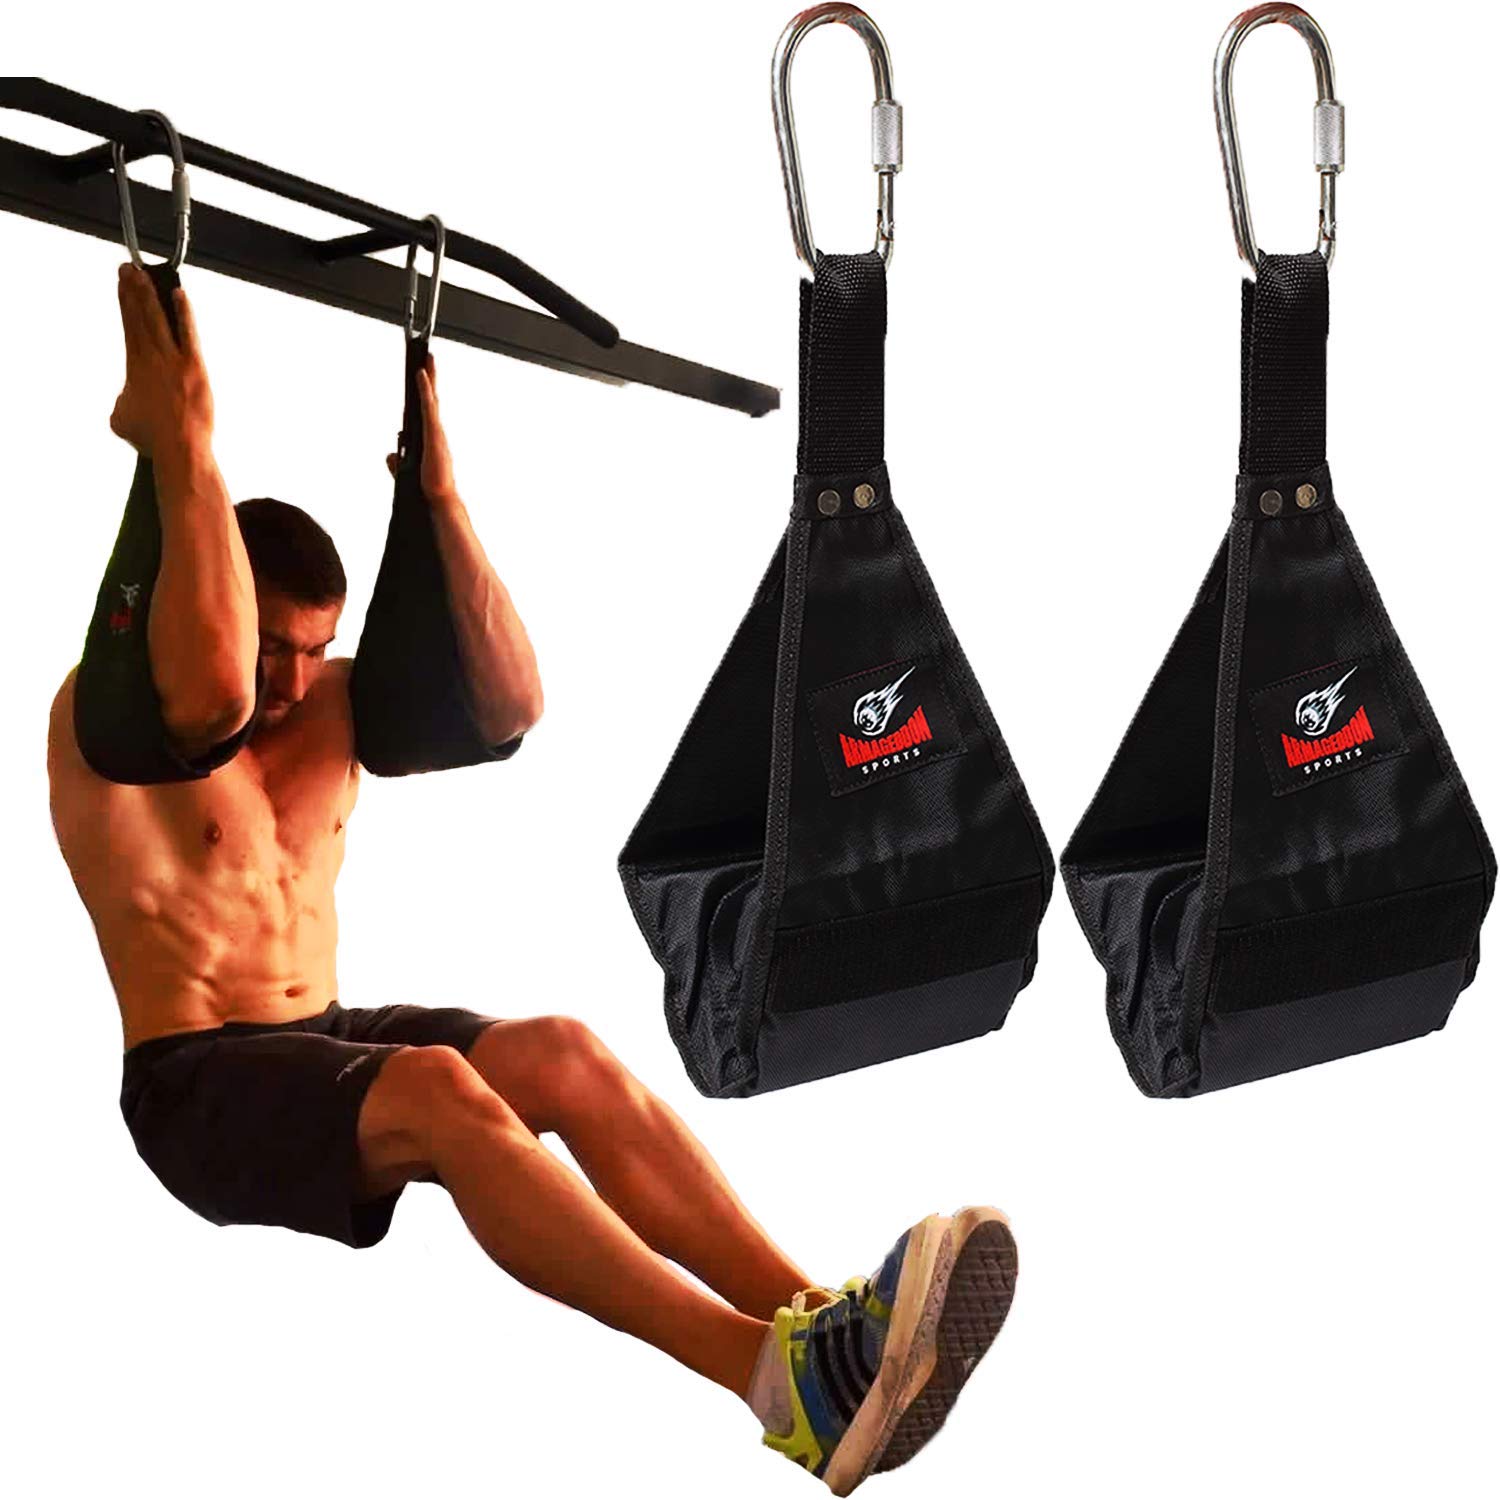 Sports Ab Slings Straps – Heavy Duty Pair for Pull Up Hanging Leg Raiser Fitness with Big Carabiner for Abdominal Training